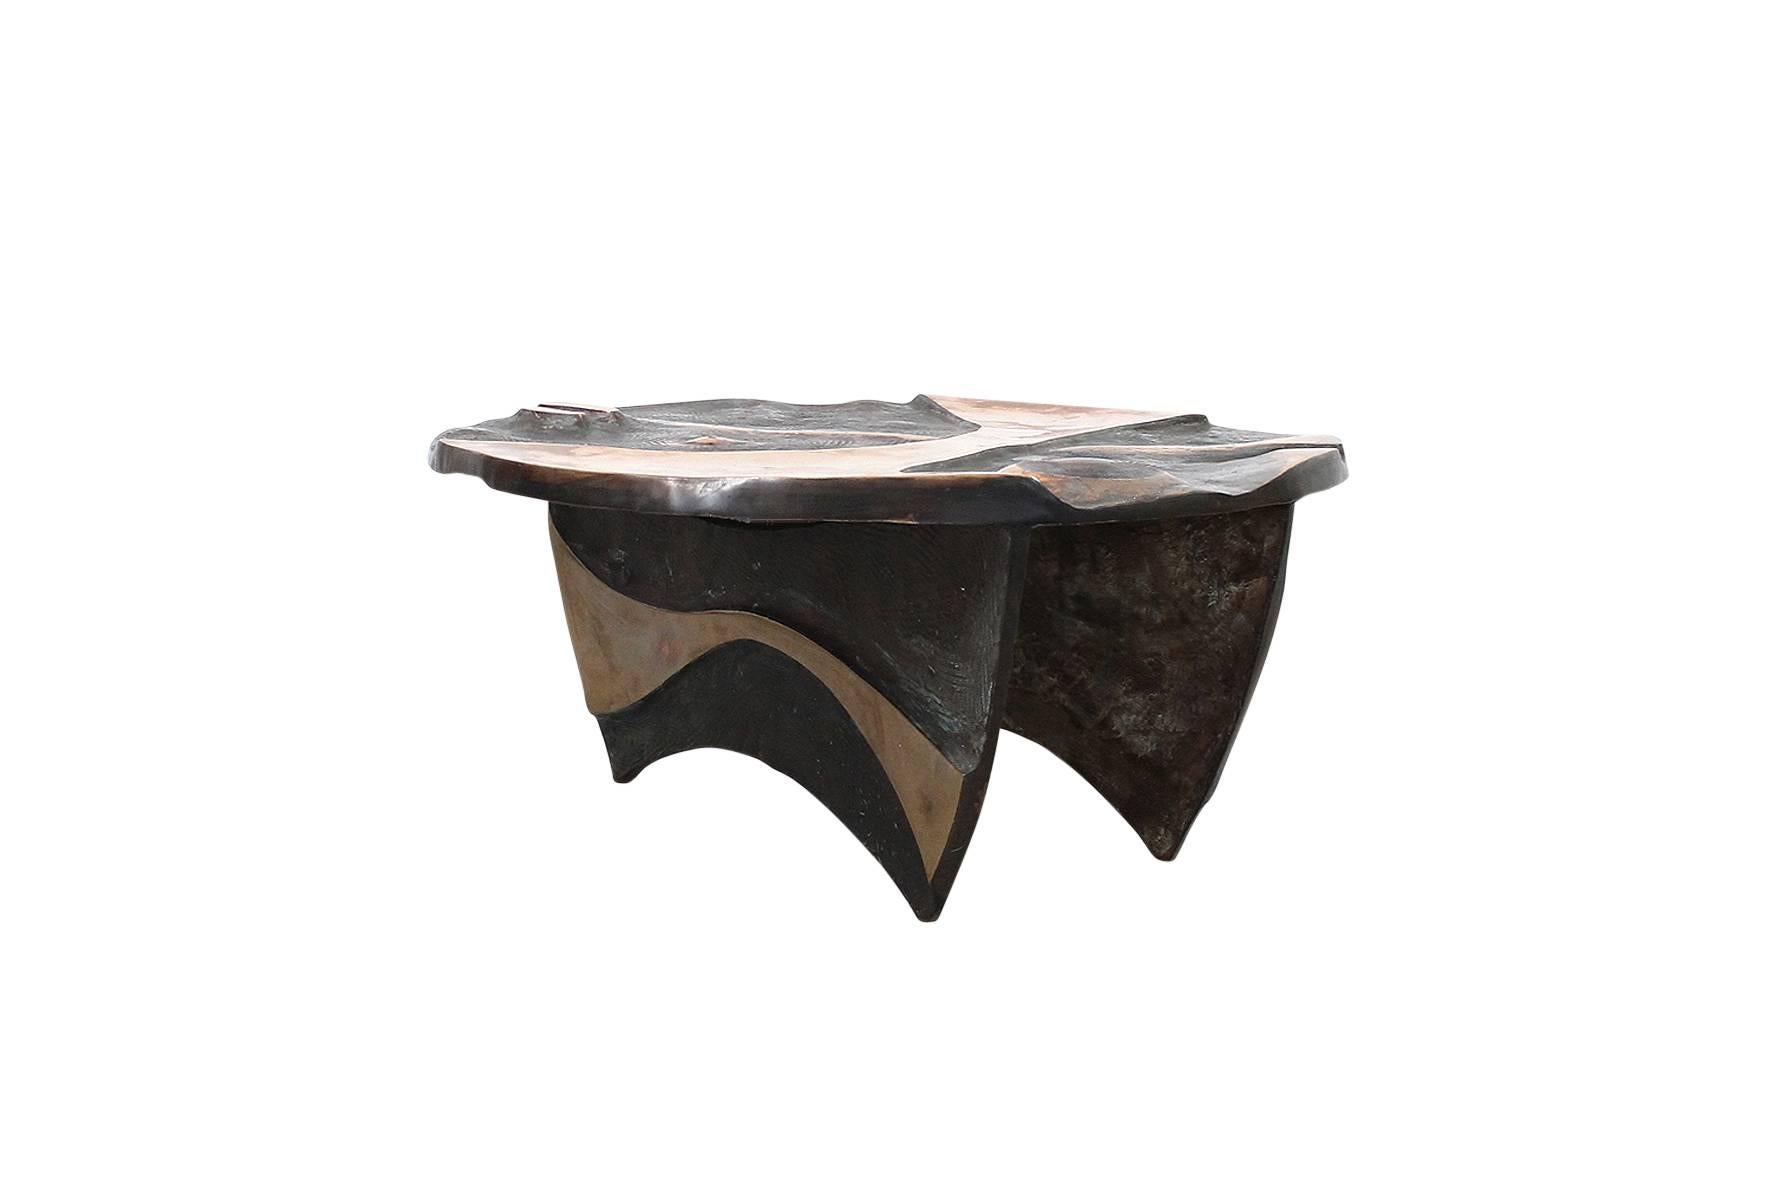 Custom designed bronze coffee table by well-known North Carolina sculptor Wayne Trapp. Abstractly carved top is reminiscent of Isamu Noguchi's designs for playgrounds. Table can be used with or without glass top.